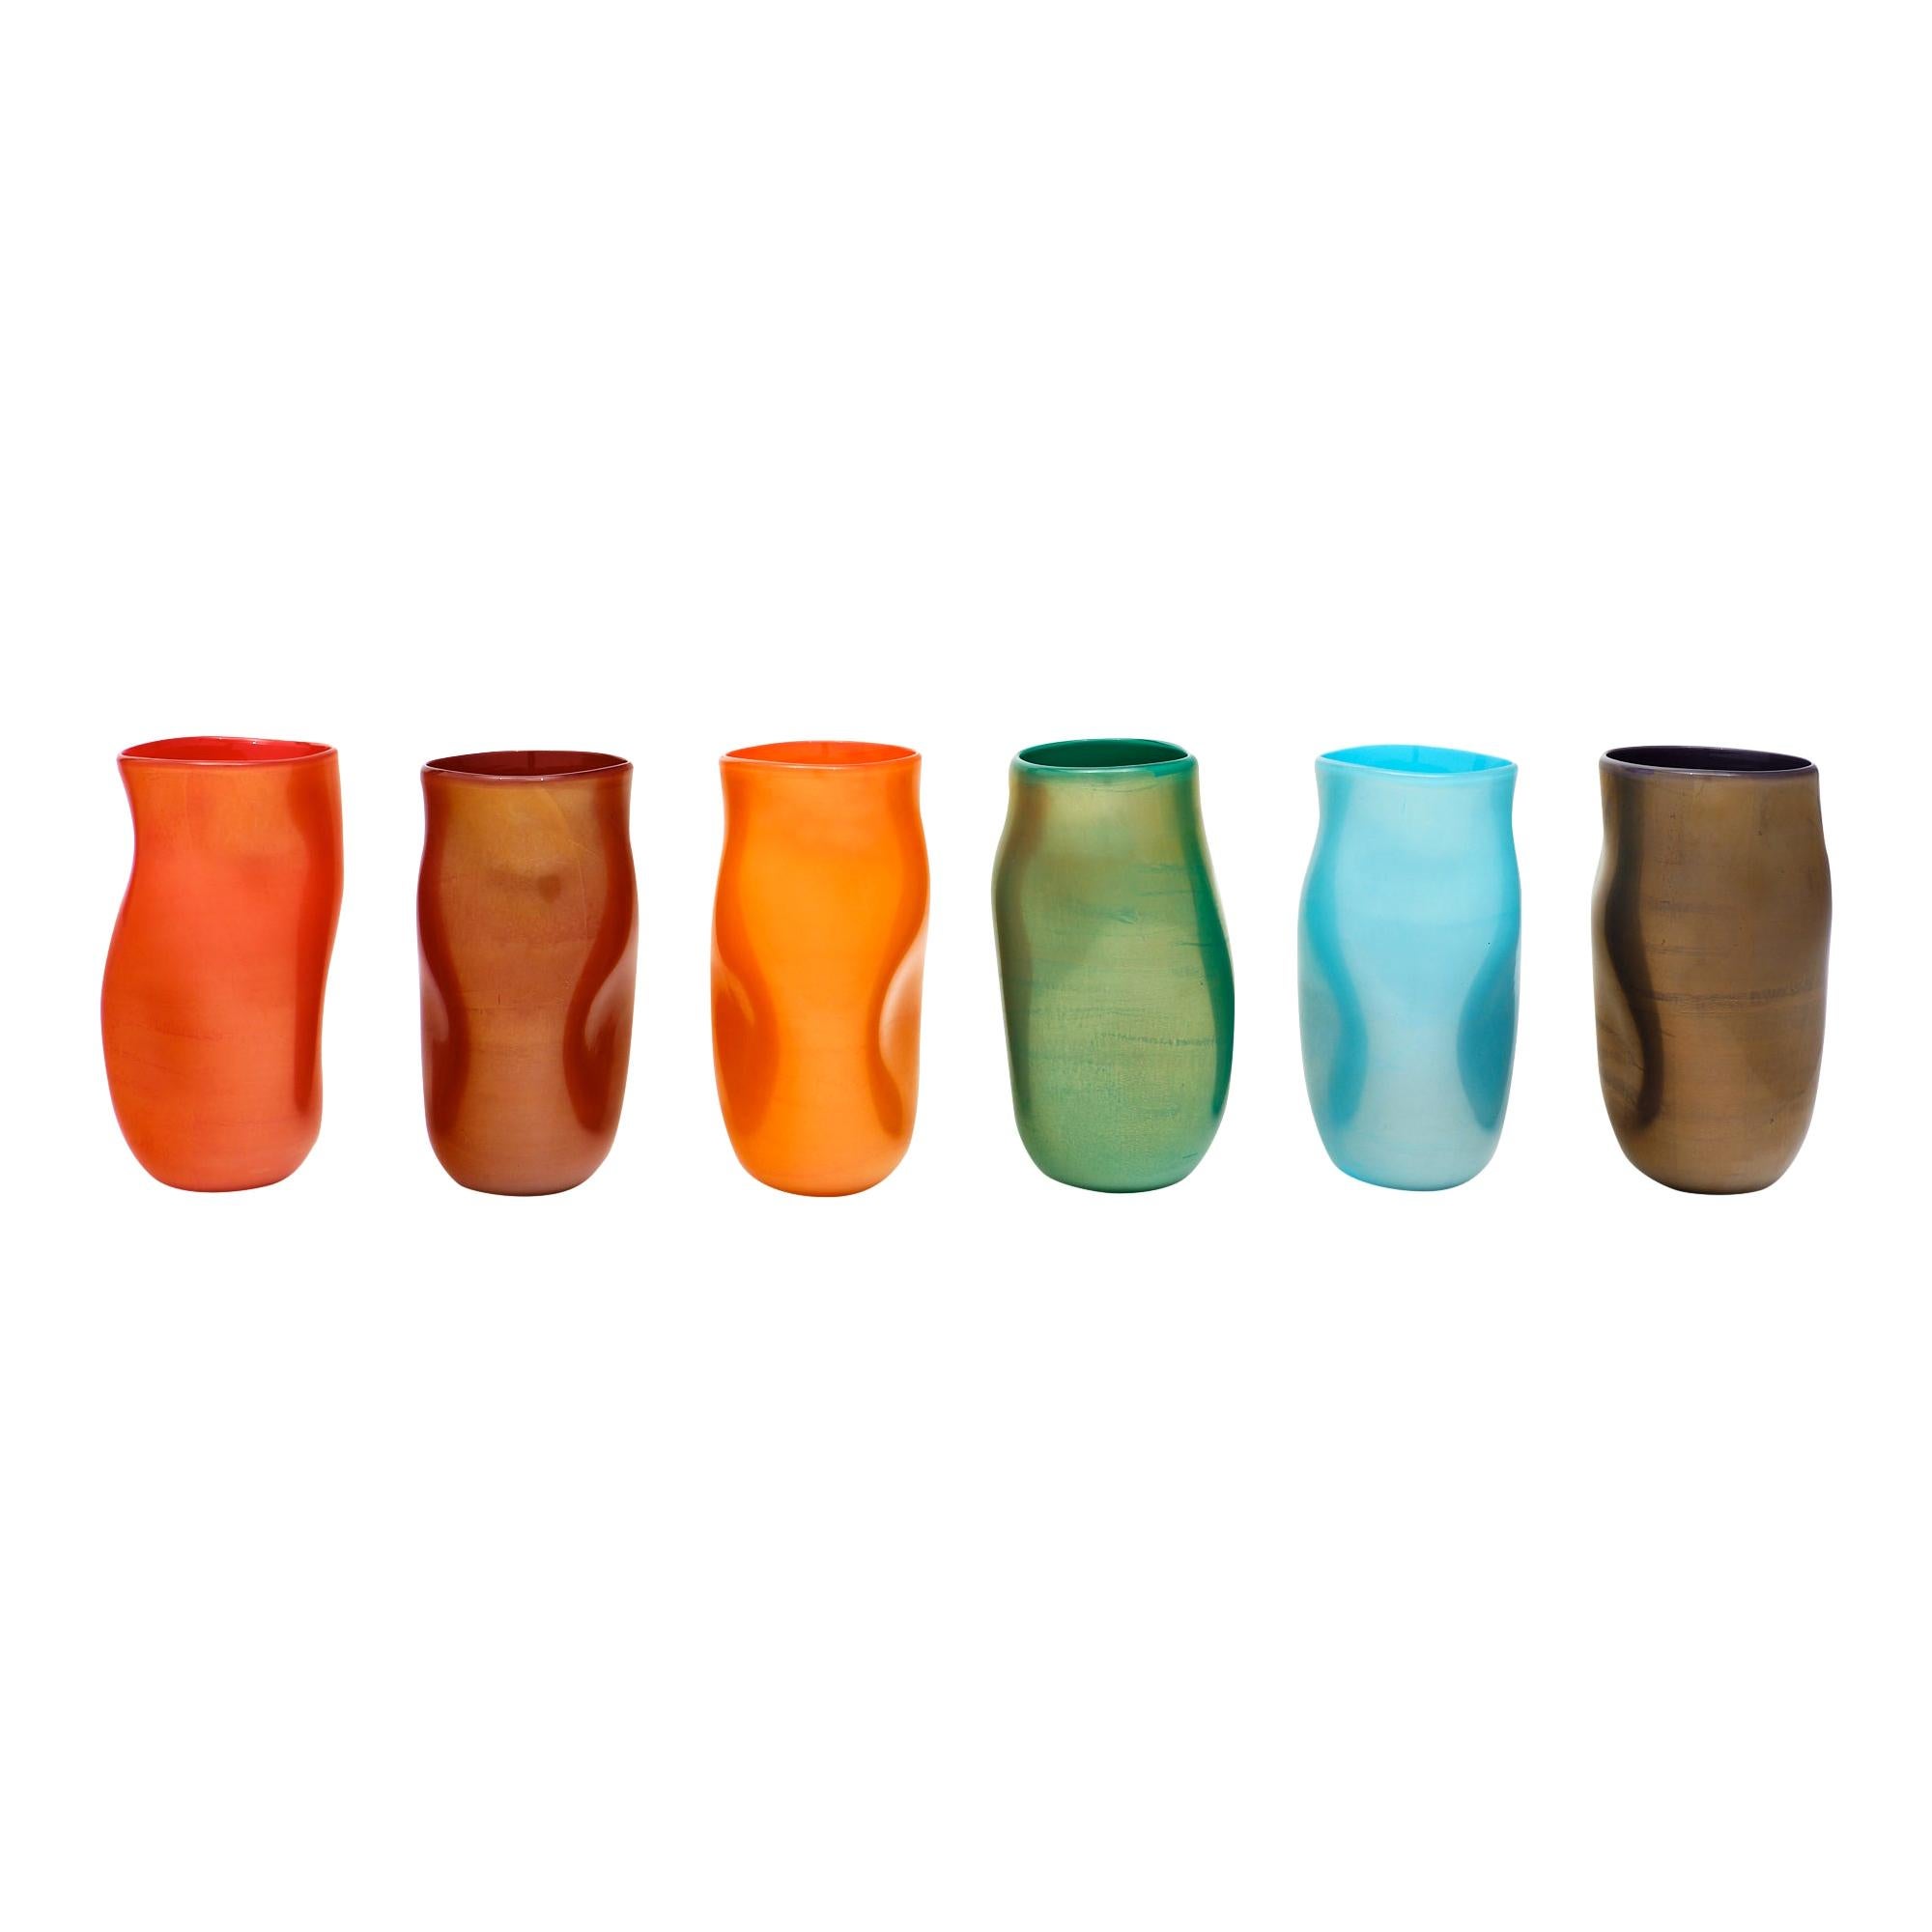 A collection of Murano glass “Cartoccio” vases. Originally six vases, now there are three available (orange, green, purple). These three “Cartoccio” (meaning paper glass) vases in various colors from the studio of Alberto Dona (signed), a “maestro